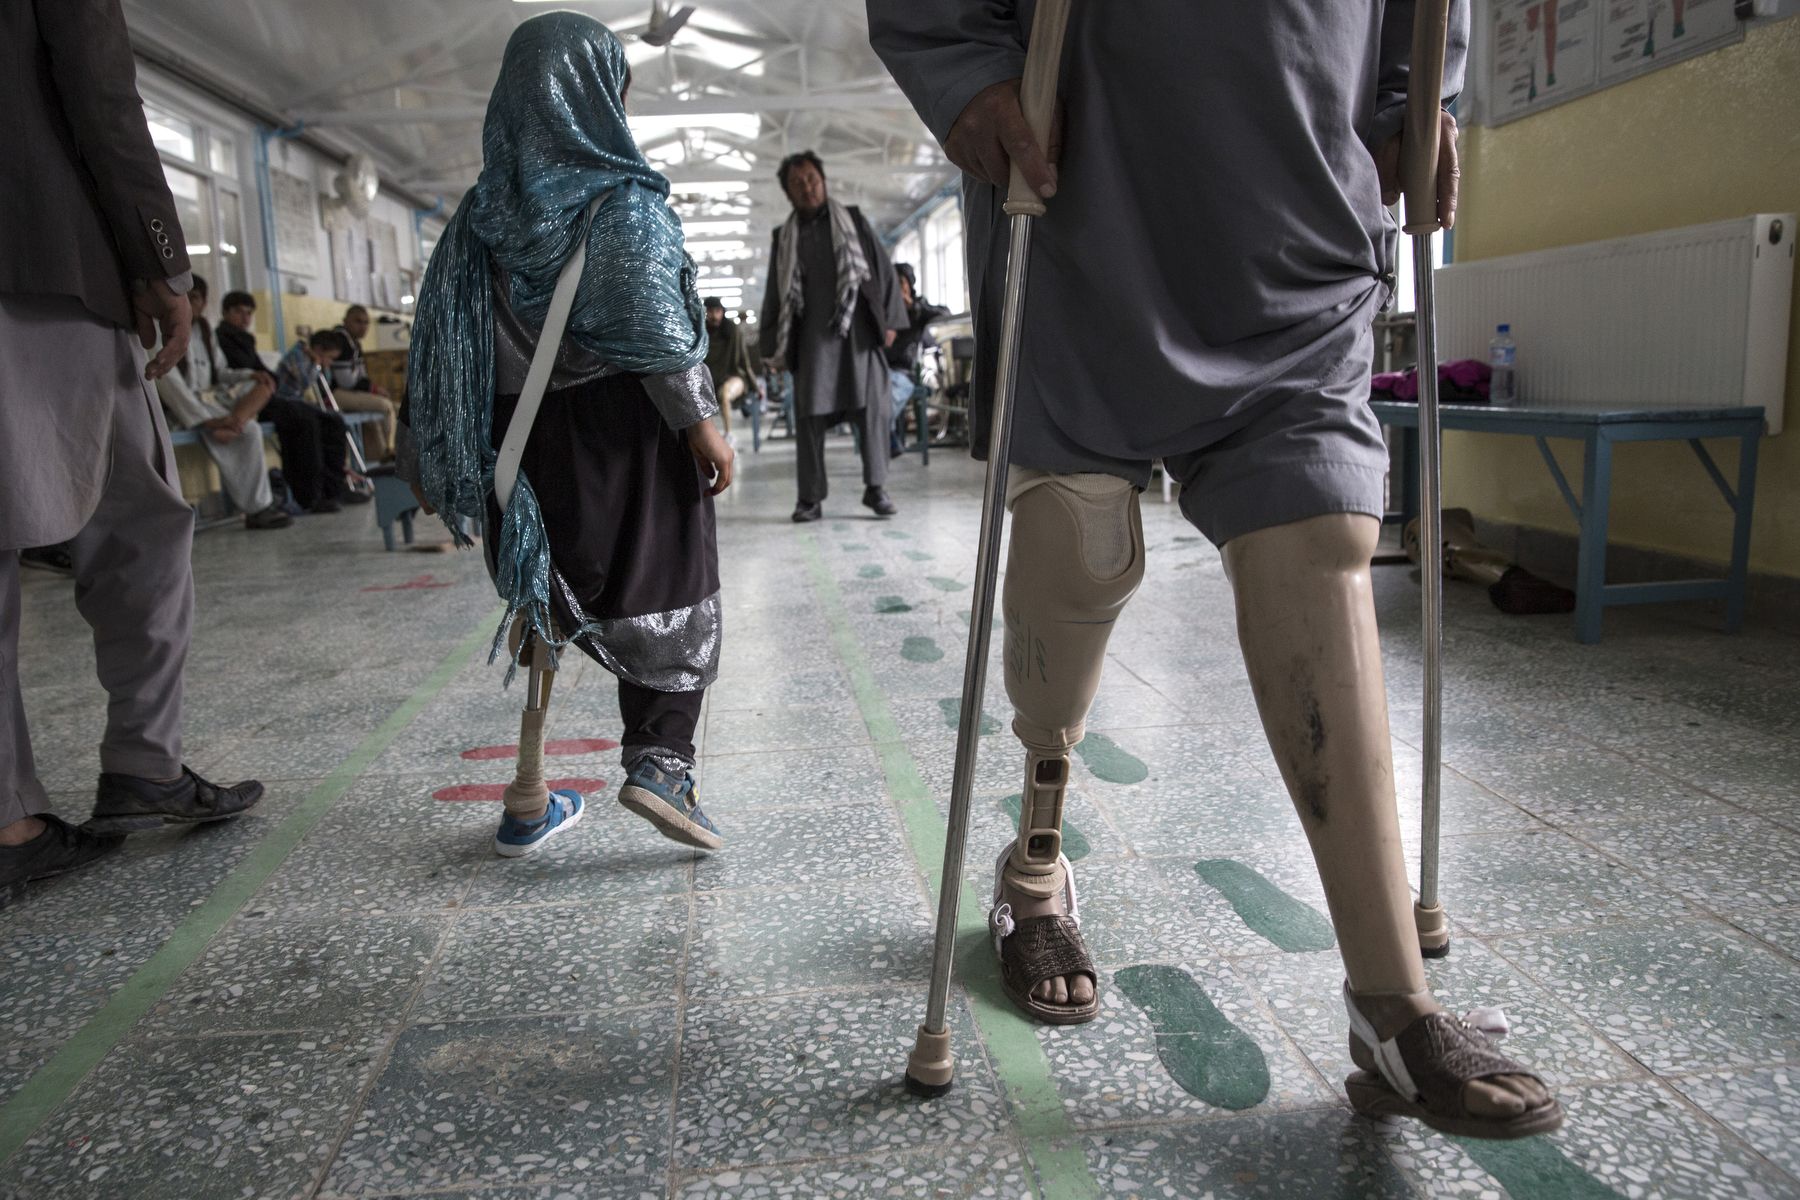 At the ICRC Orthopedic center, handicapped patients practice walking on their prosthetics in Kabul on April 2, 2016. Image by Paula Bronstein. Afghanistan, 2016.